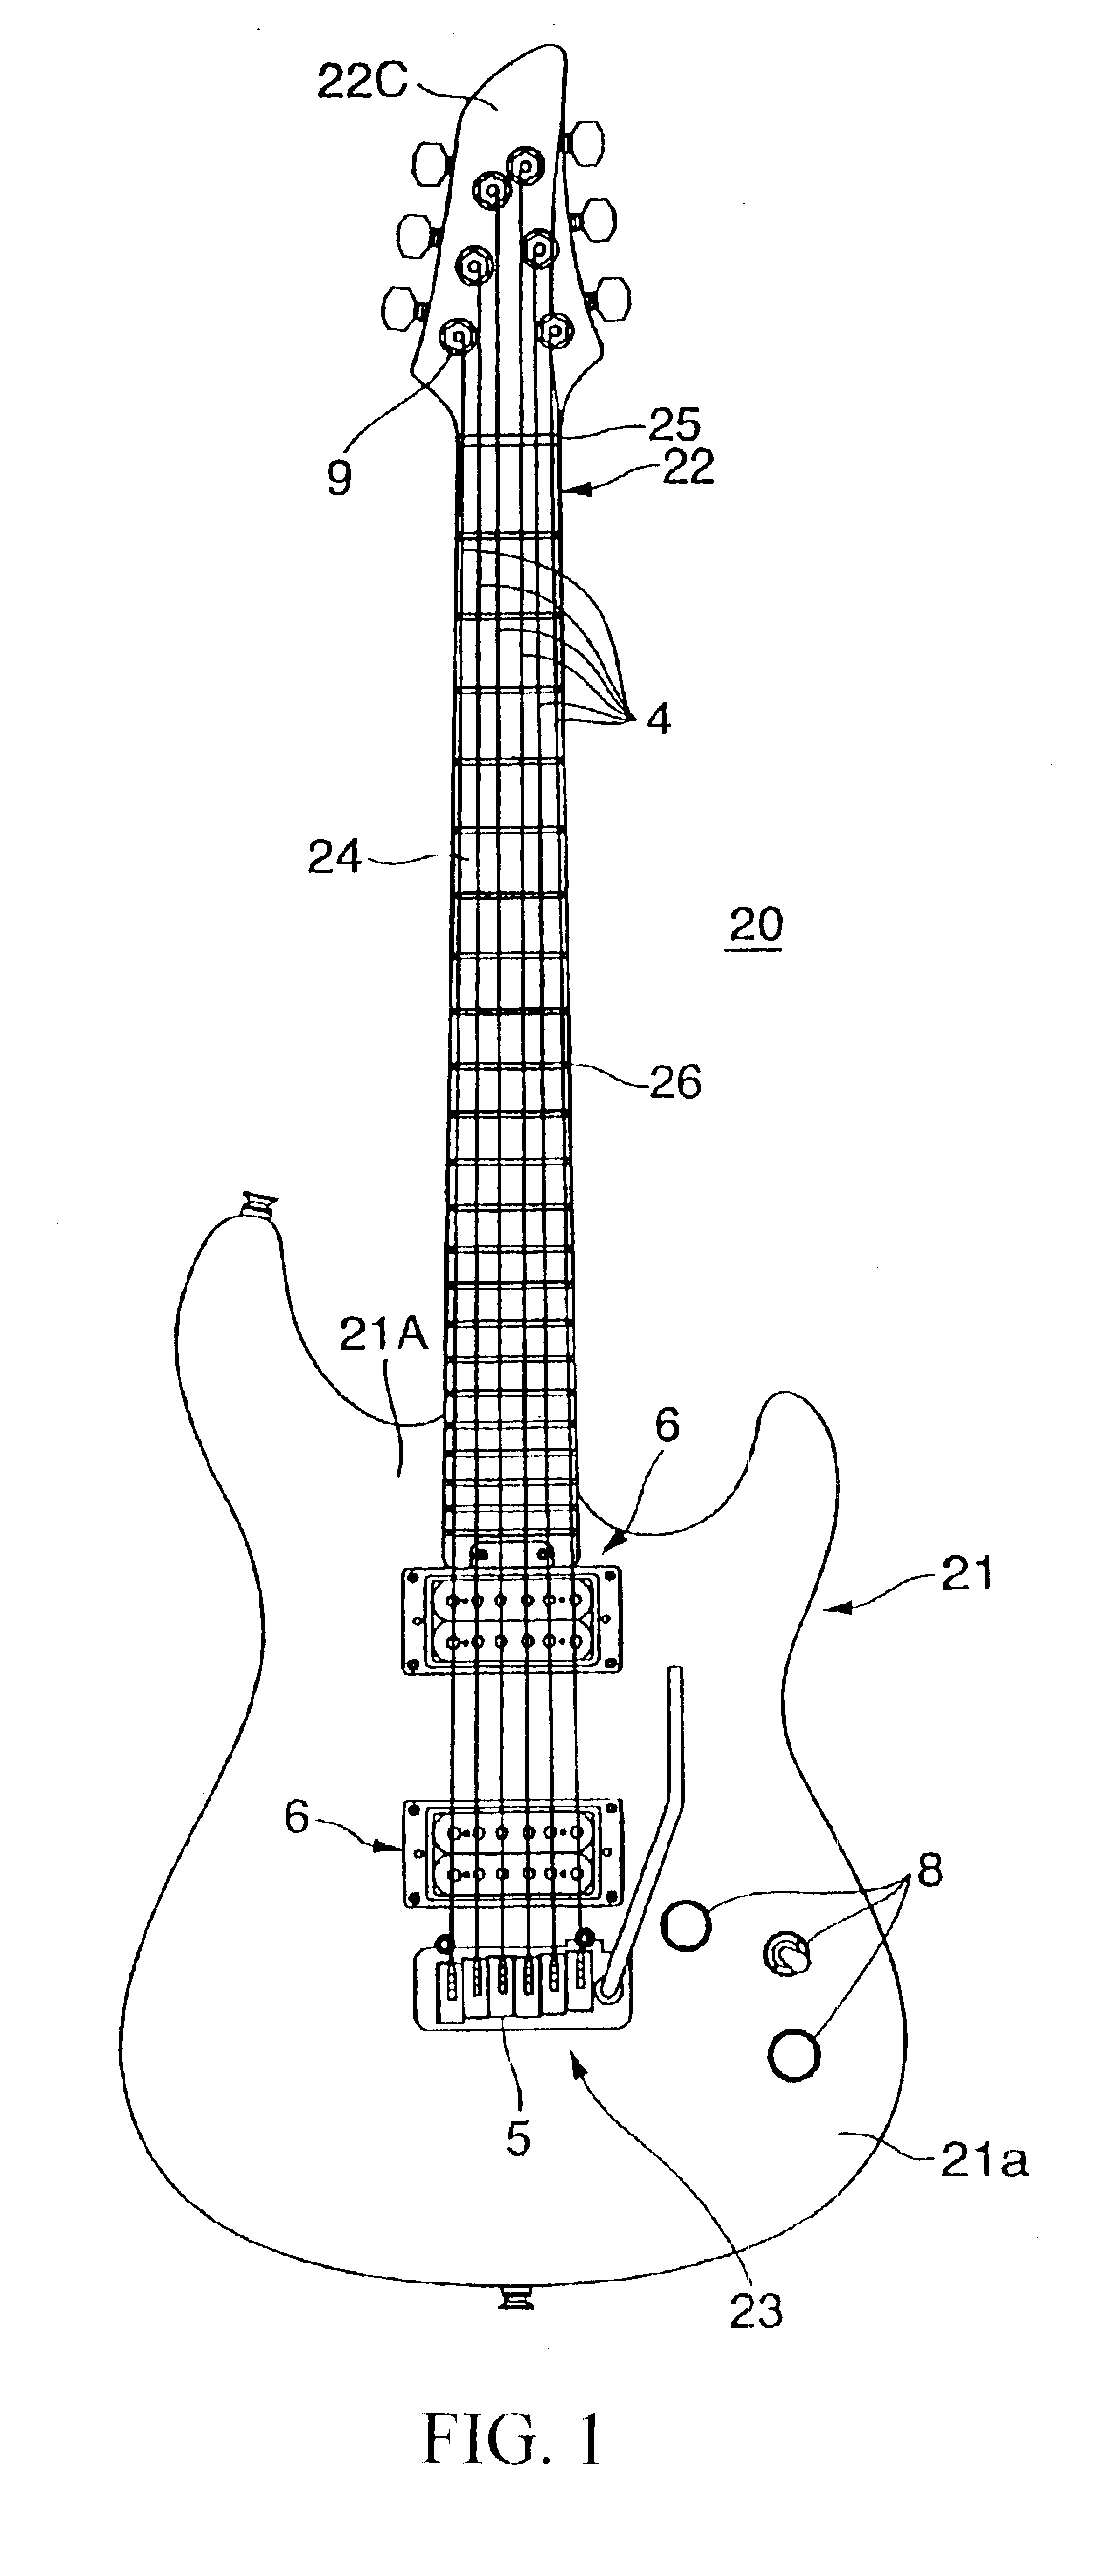 Body structure of guitar